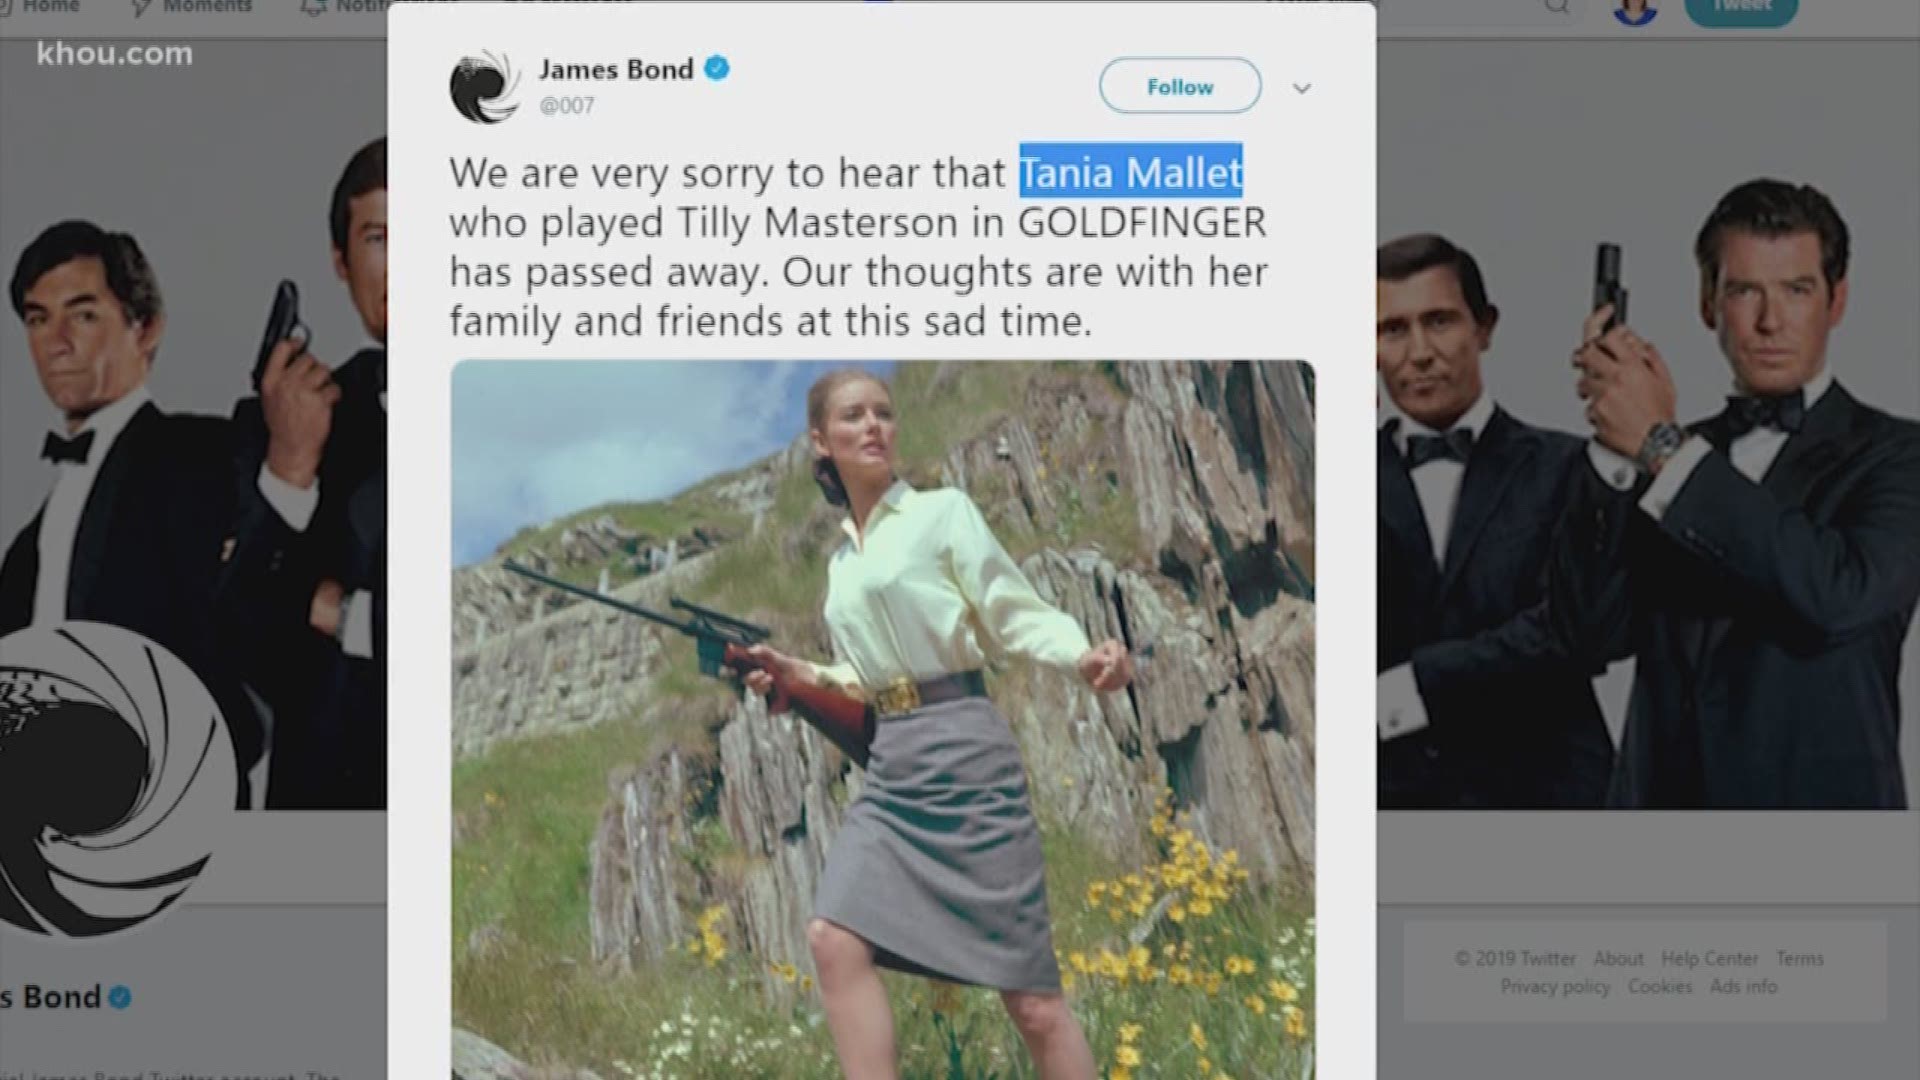 Tania Mallet, known for her role as Bond Girl in "Goldfinger" has died. The James Bond account on Twitter said they were sorry to hear of her death and their prayers are with her family.